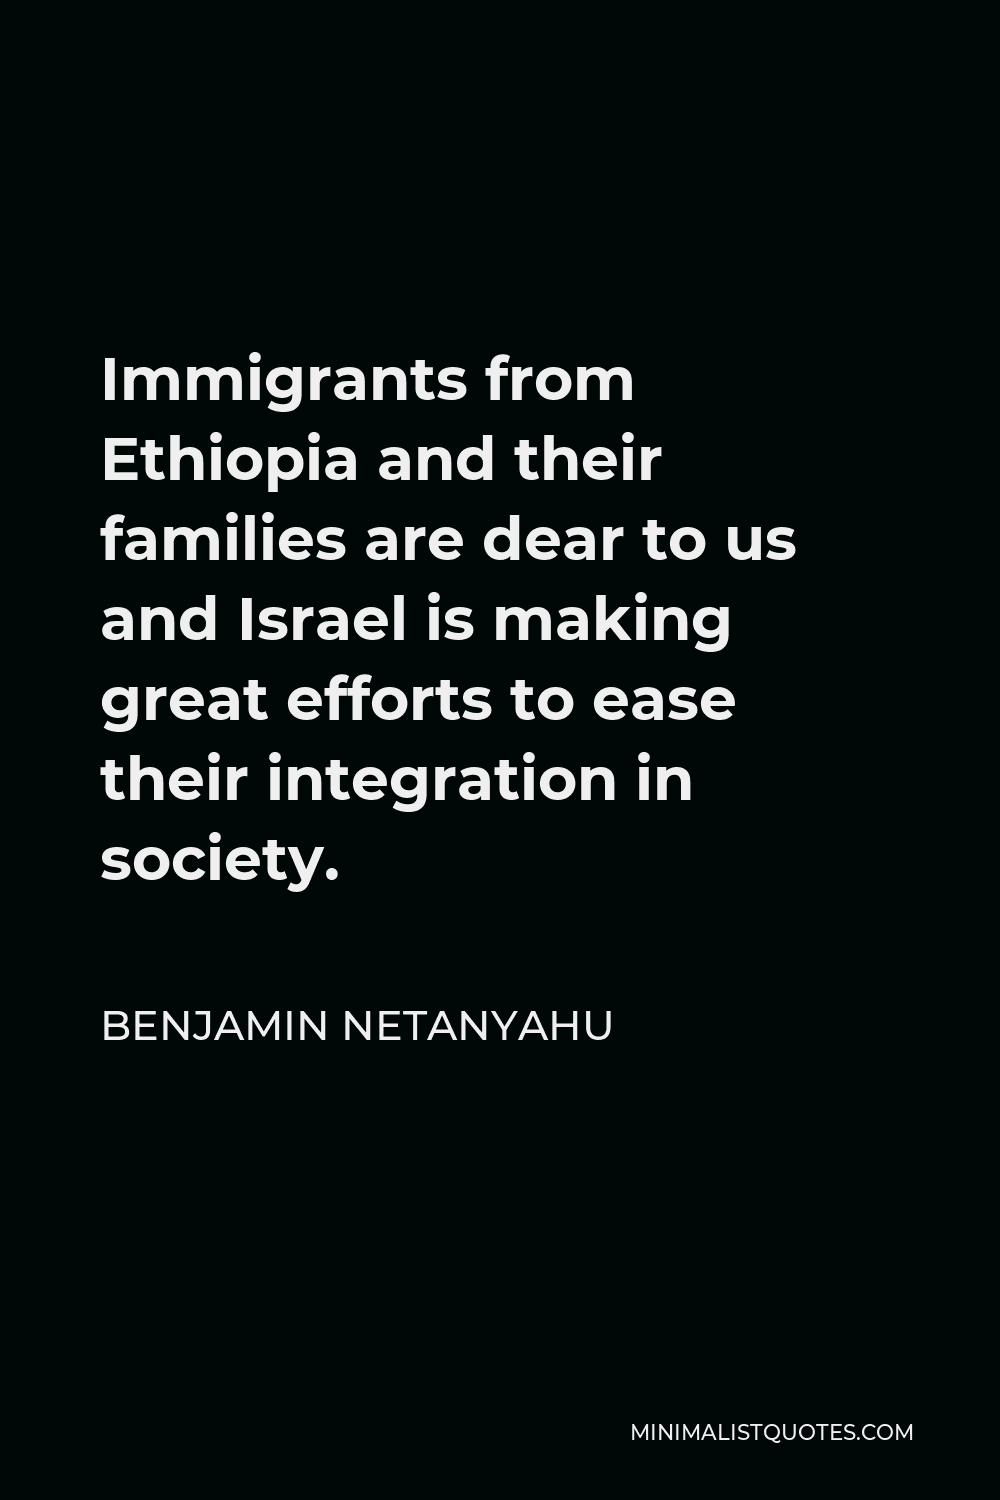 Benjamin Netanyahu Quote - Immigrants from Ethiopia and their families are dear to us and Israel is making great efforts to ease their integration in society.